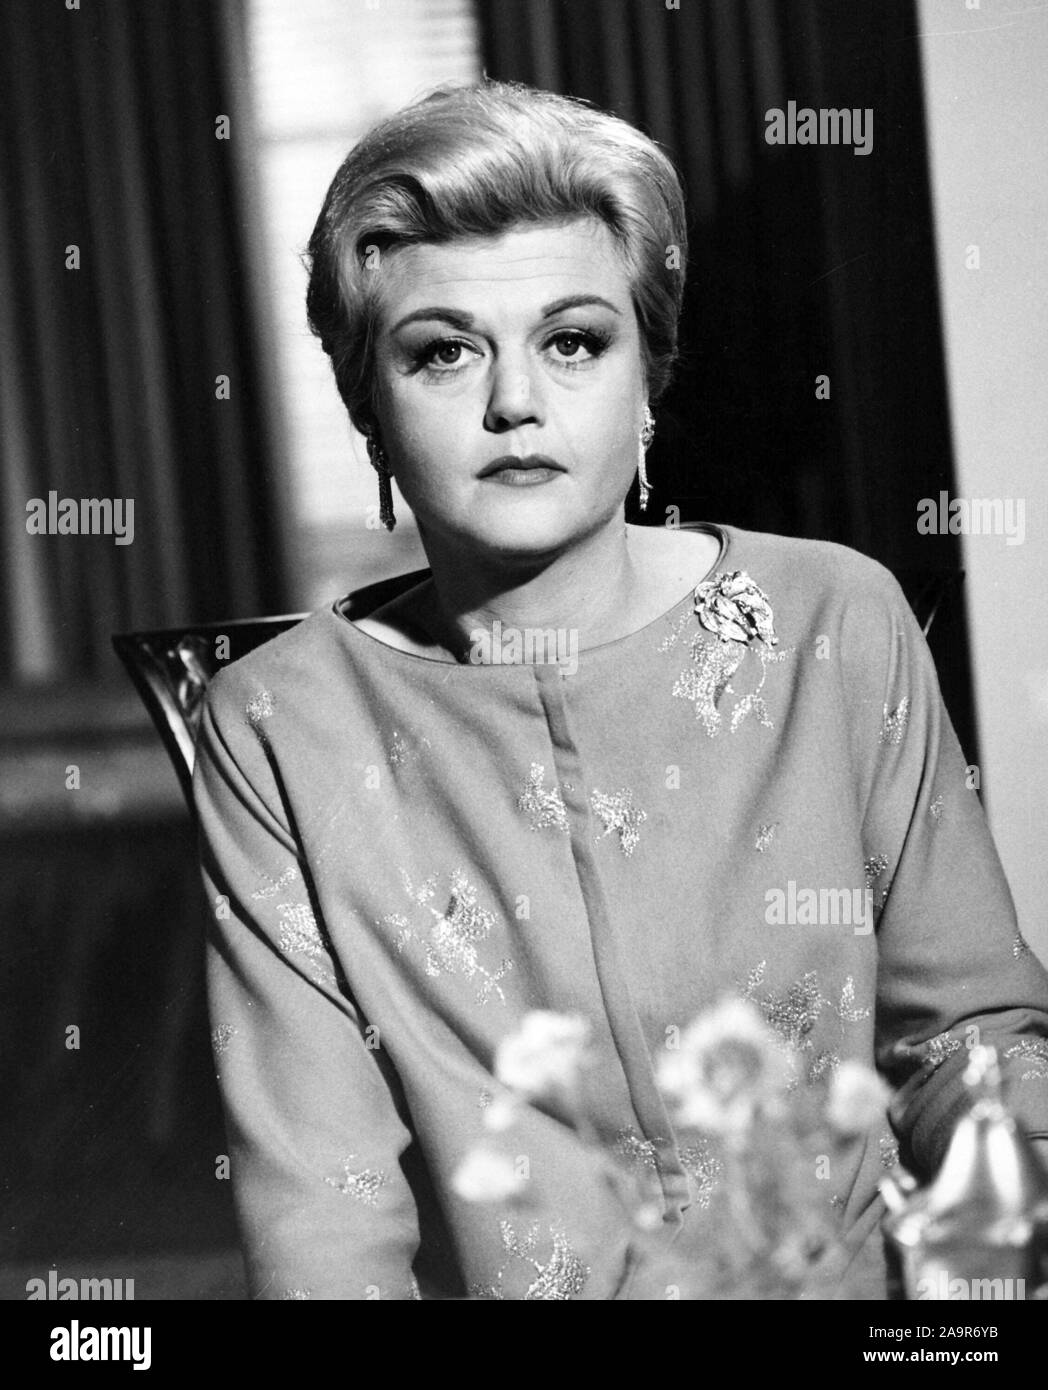 ANGELA LANSBURY in THE MANCHURIAN CANDIDATE (1962), directed by JOHN FRANKENHEIMER. Credit: UNITED ARTISTS / Album Stock Photo